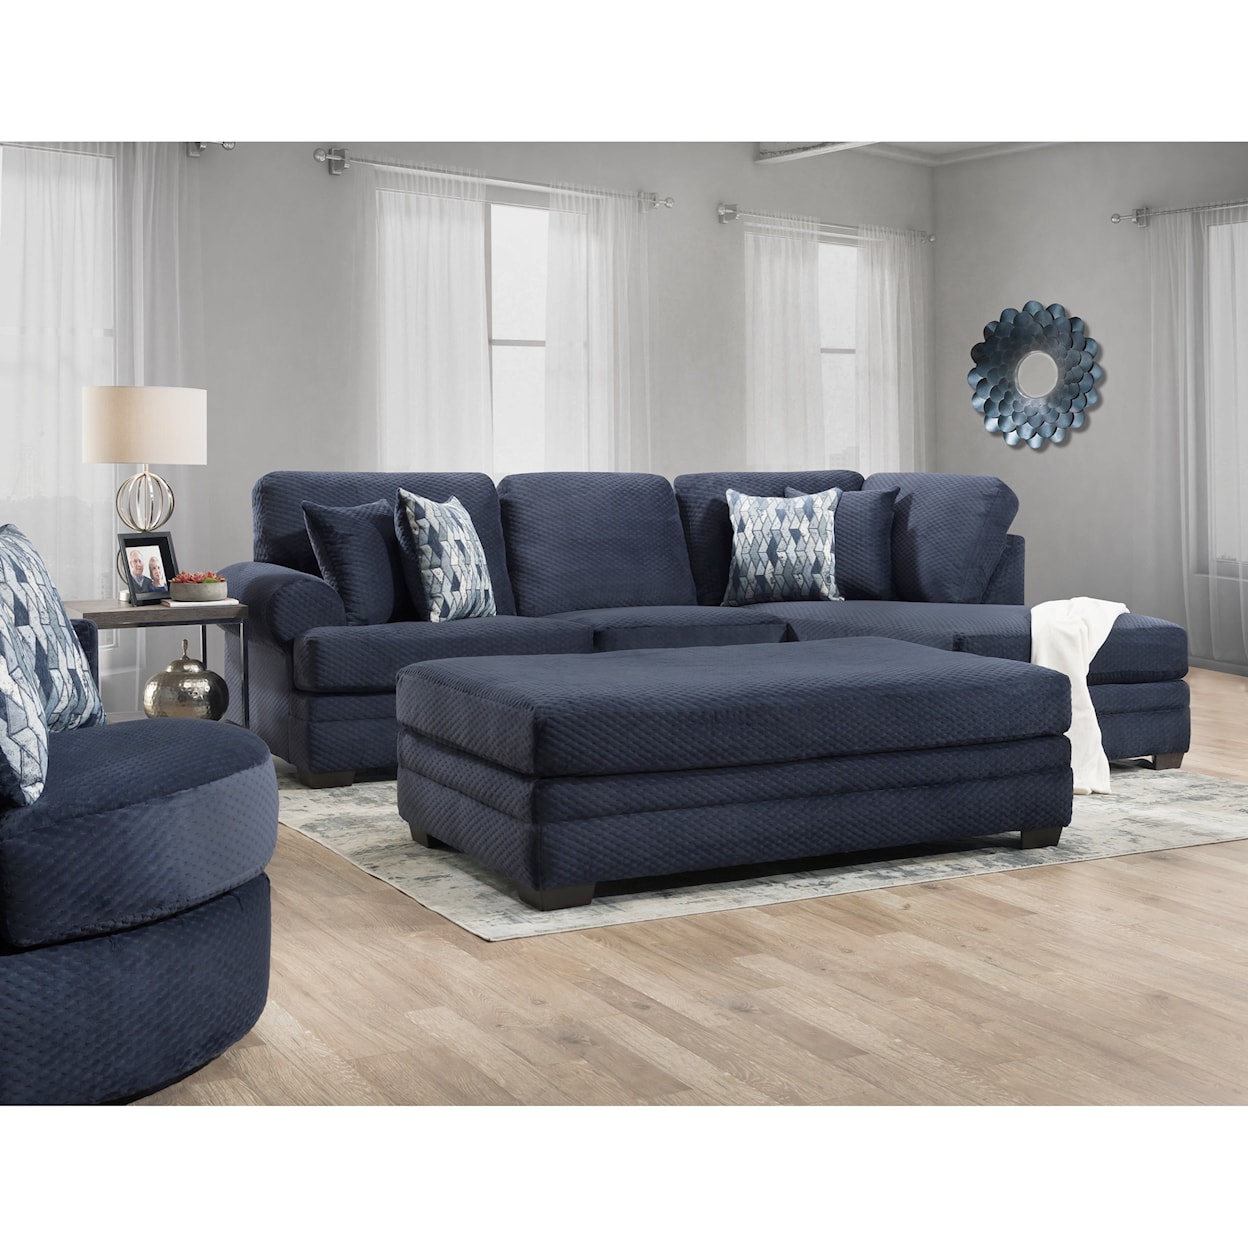 Peak Living 7000 Three Seat Sectional with Rounded Arms